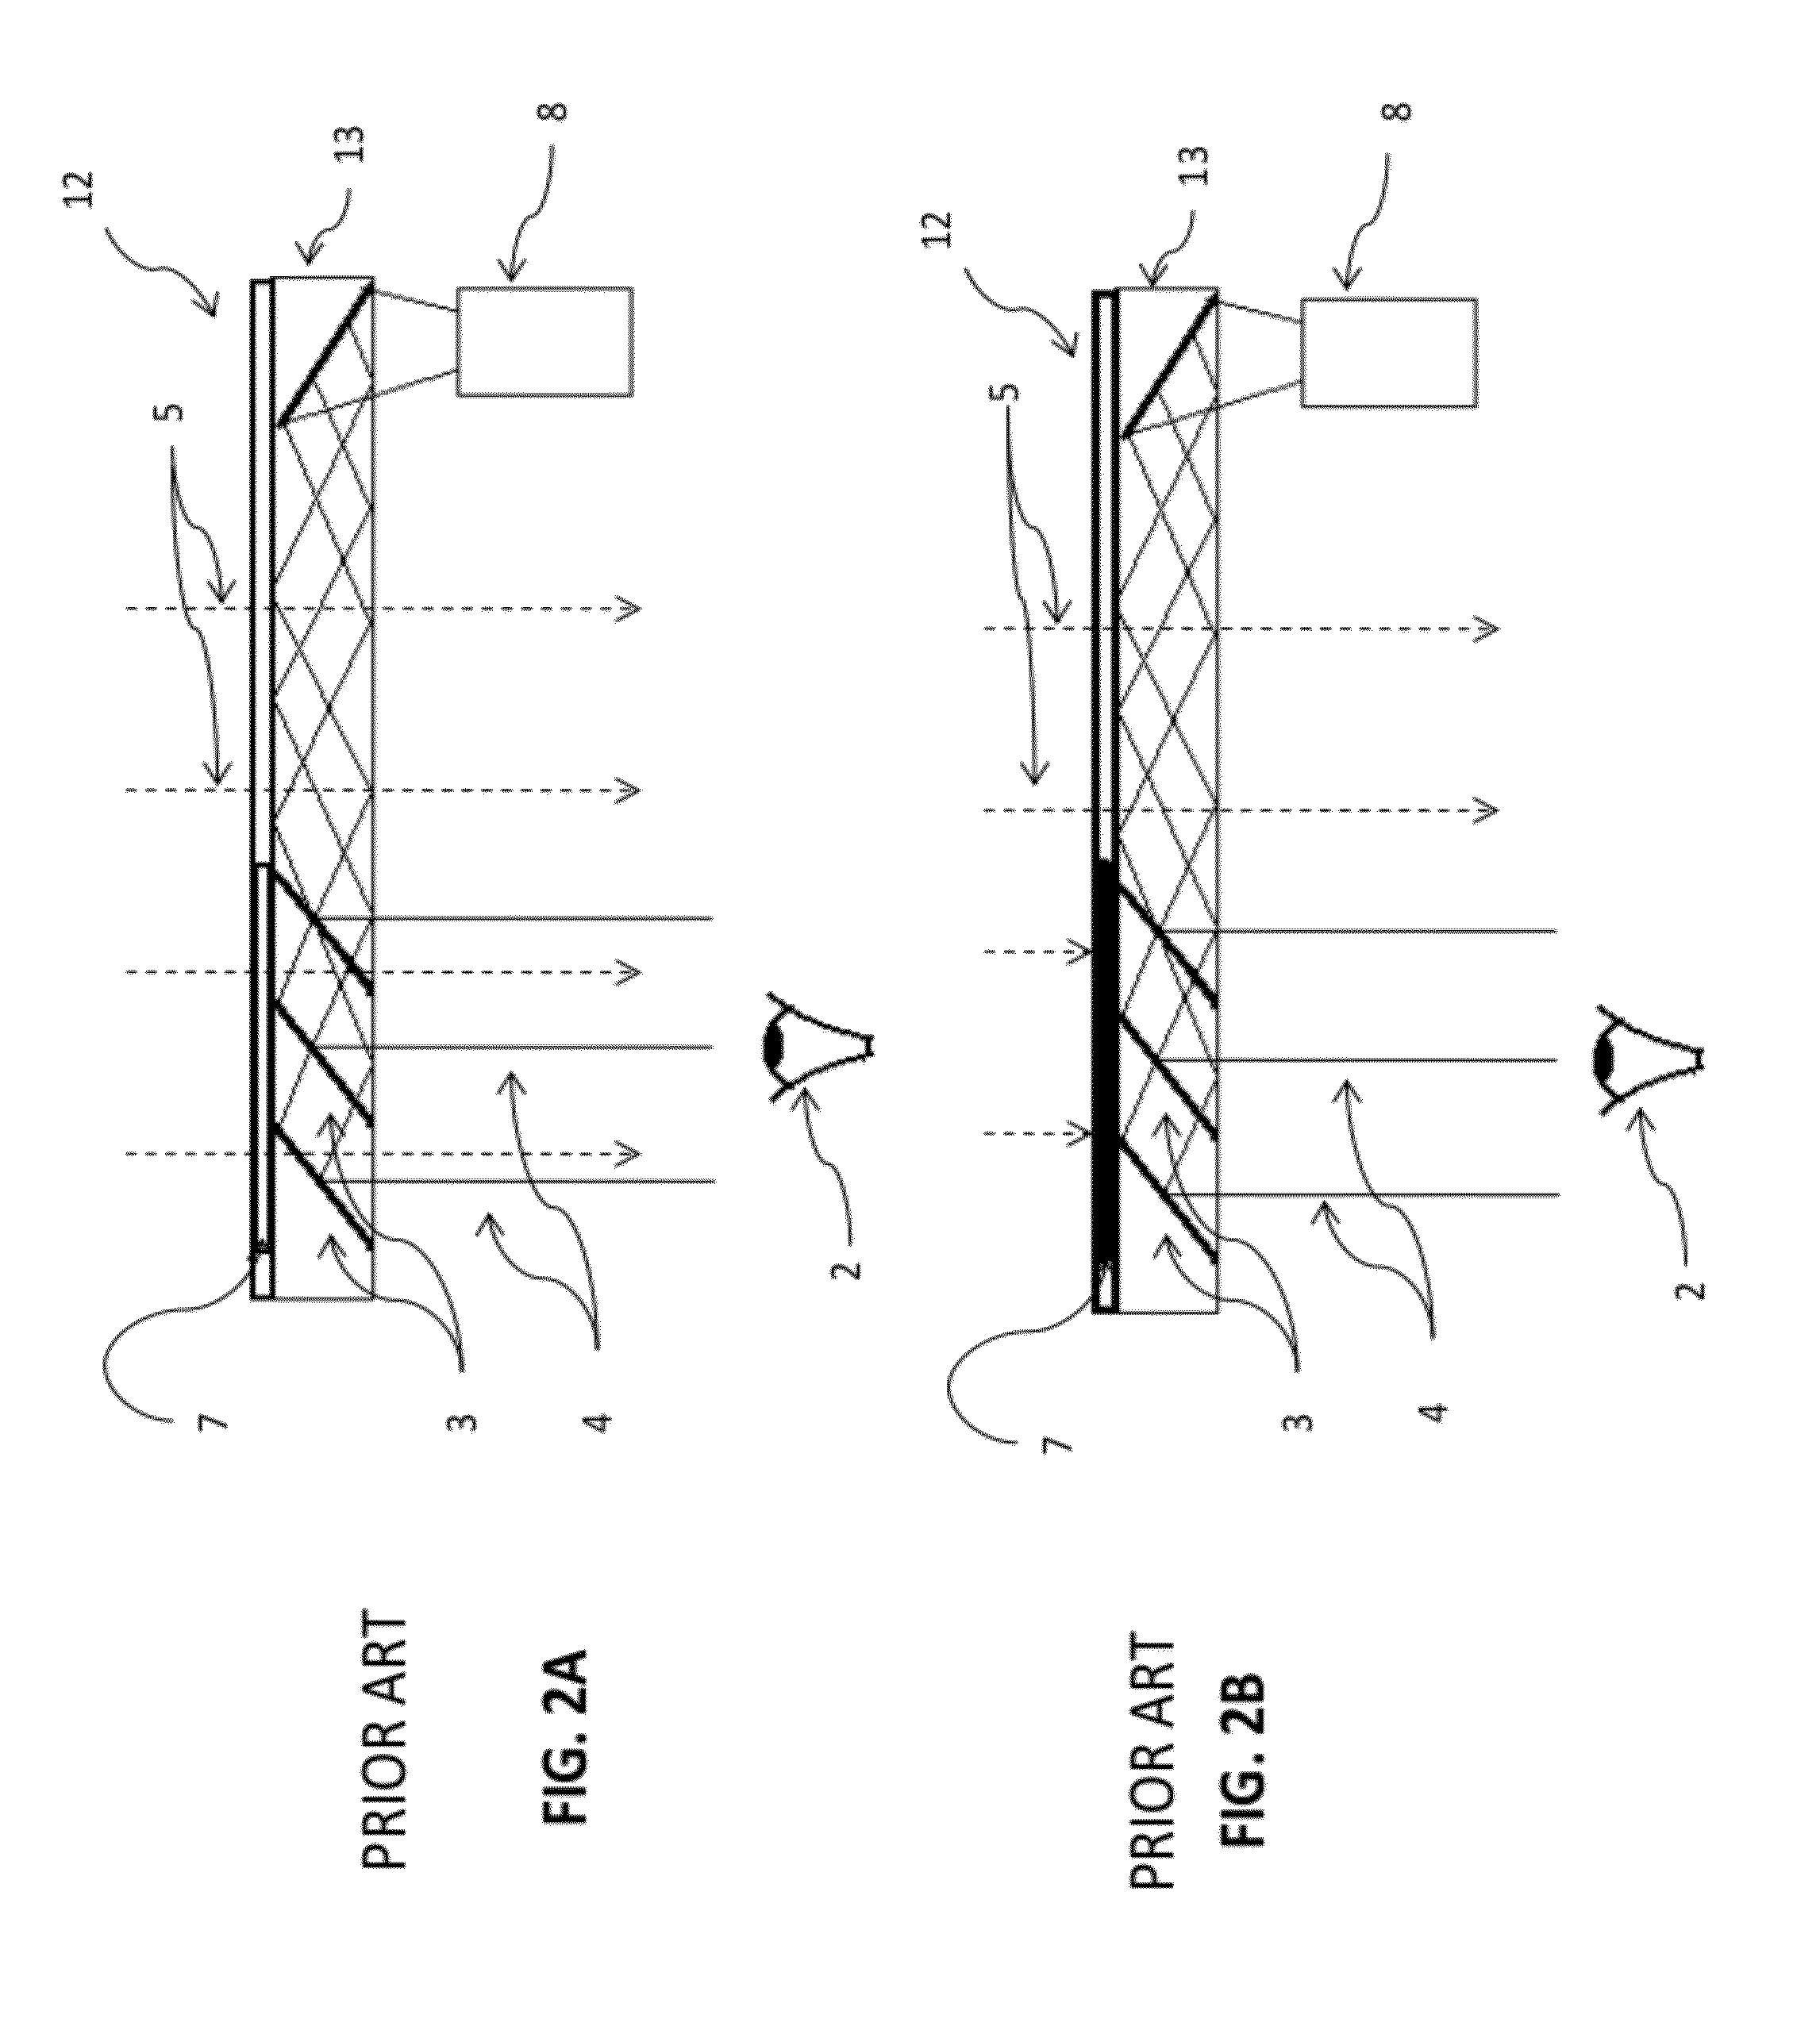 Switchable head-mounted display transition